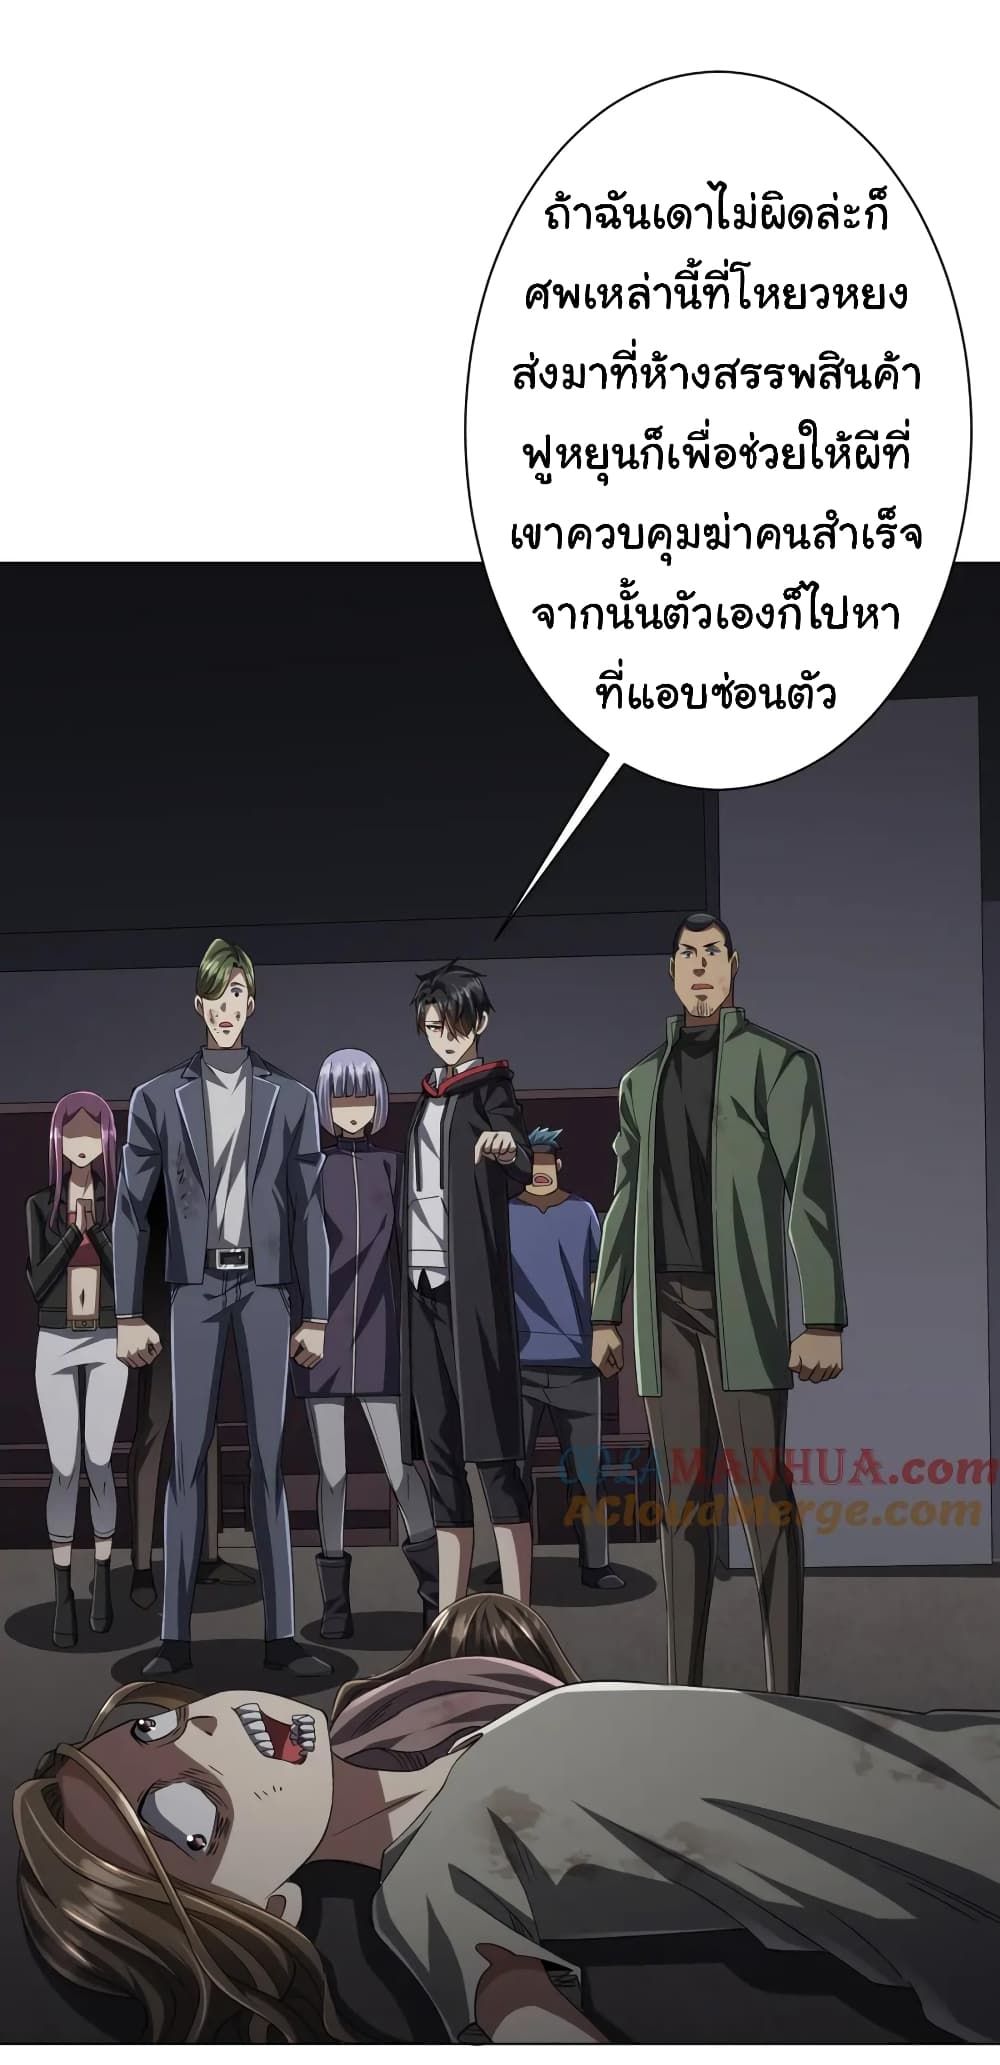 Start with Trillions of Coins ตอนที่ 51 (27)